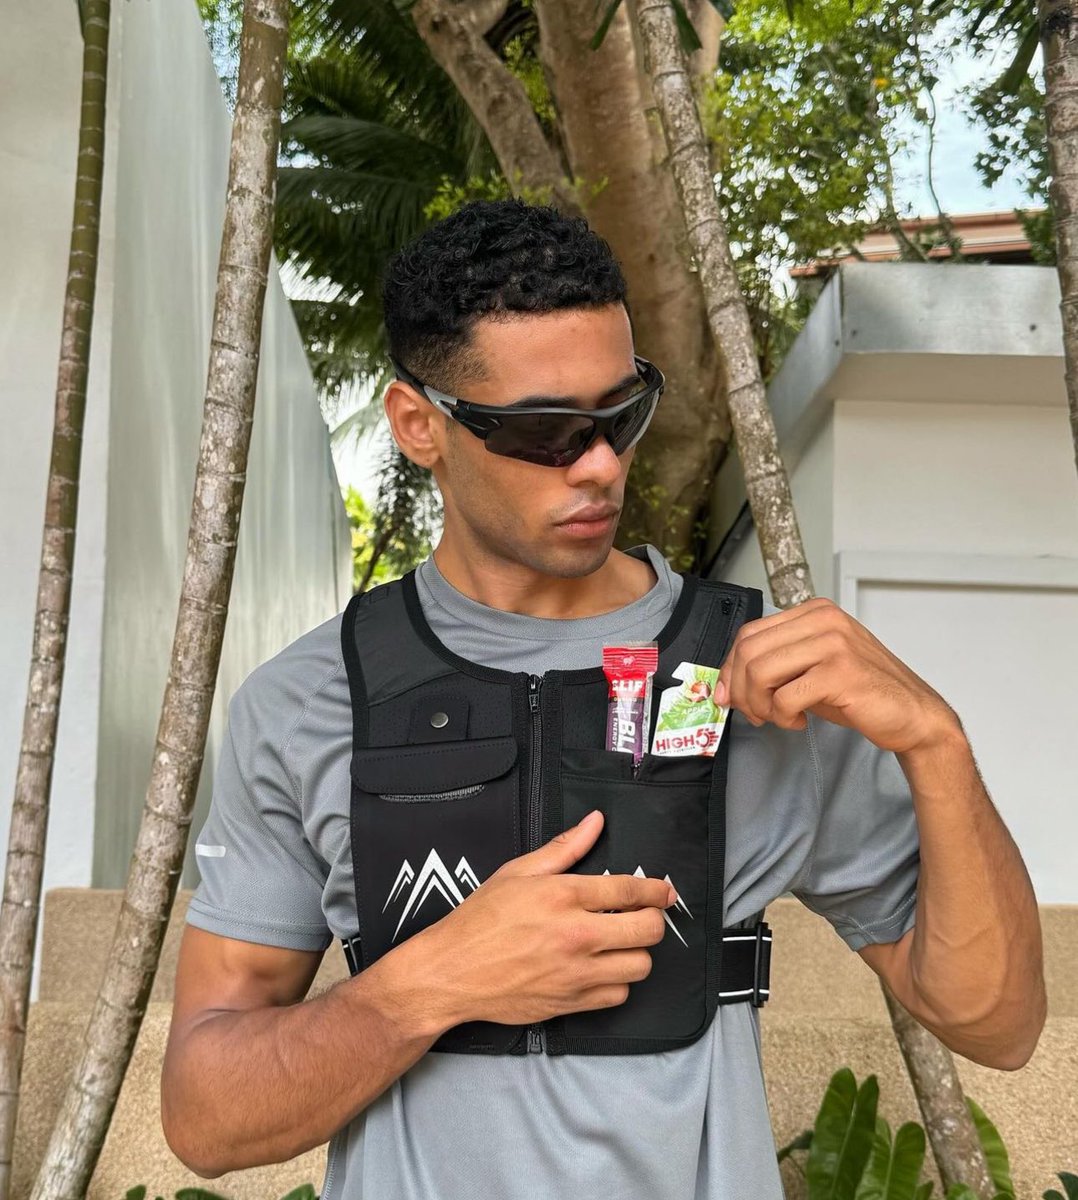 GET 10% OFF YOUR AONIJIE HYDRATION VEST BY USING CODE CRUZRUNS10